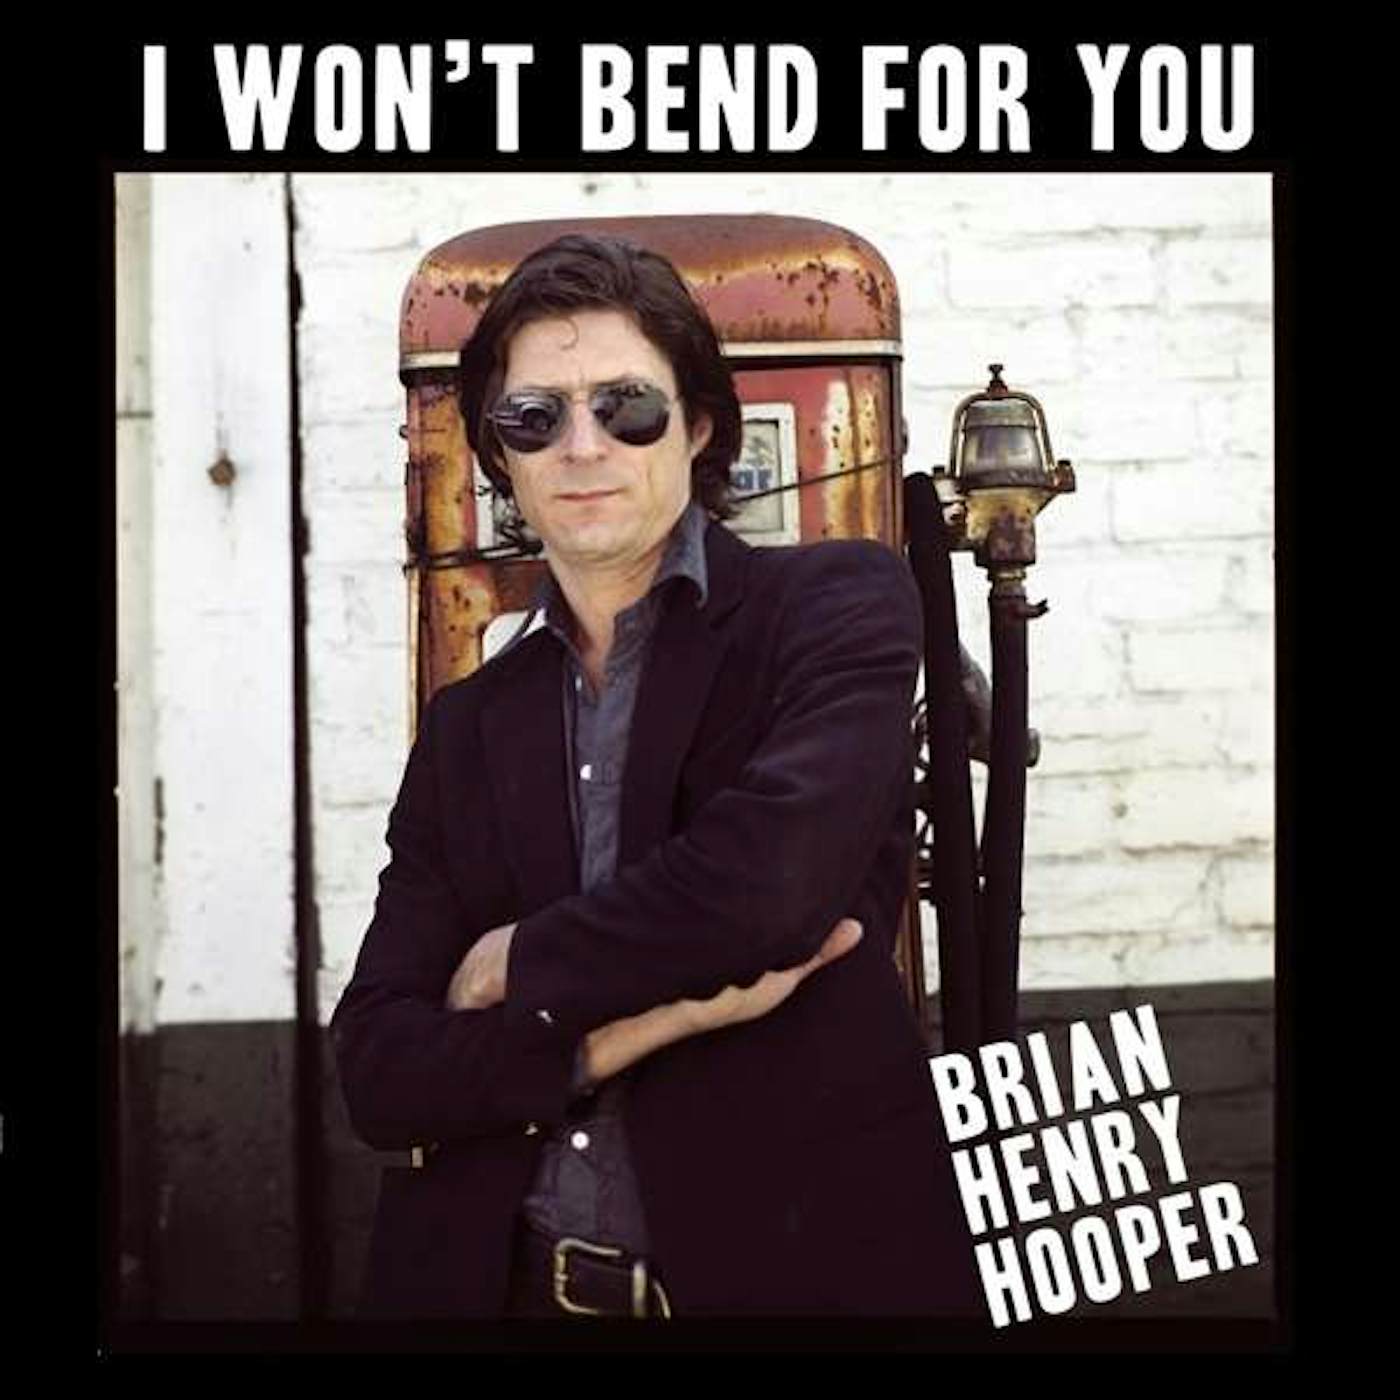 Brian Henry Hooper I WON'T BEND FOR YOU Vinyl Record